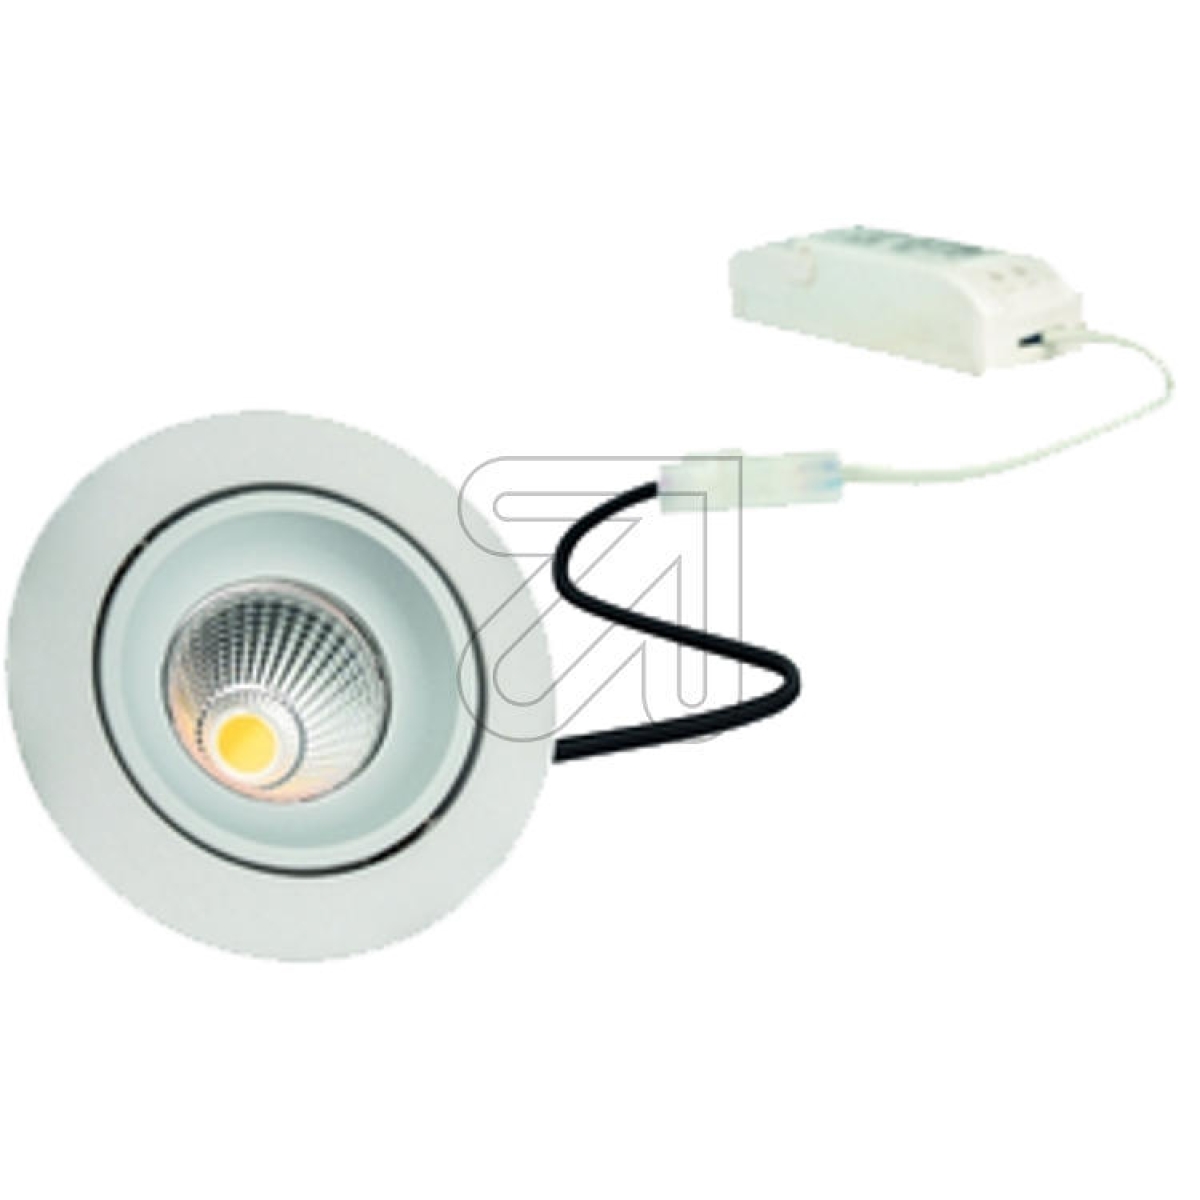 rutec Licht GmbH & Co. KGLED recessed spotlight 6W 3000K, dimmable, white 230V, beam angle 36°, swiveling, ALU57301WWDArticle-No: 645240